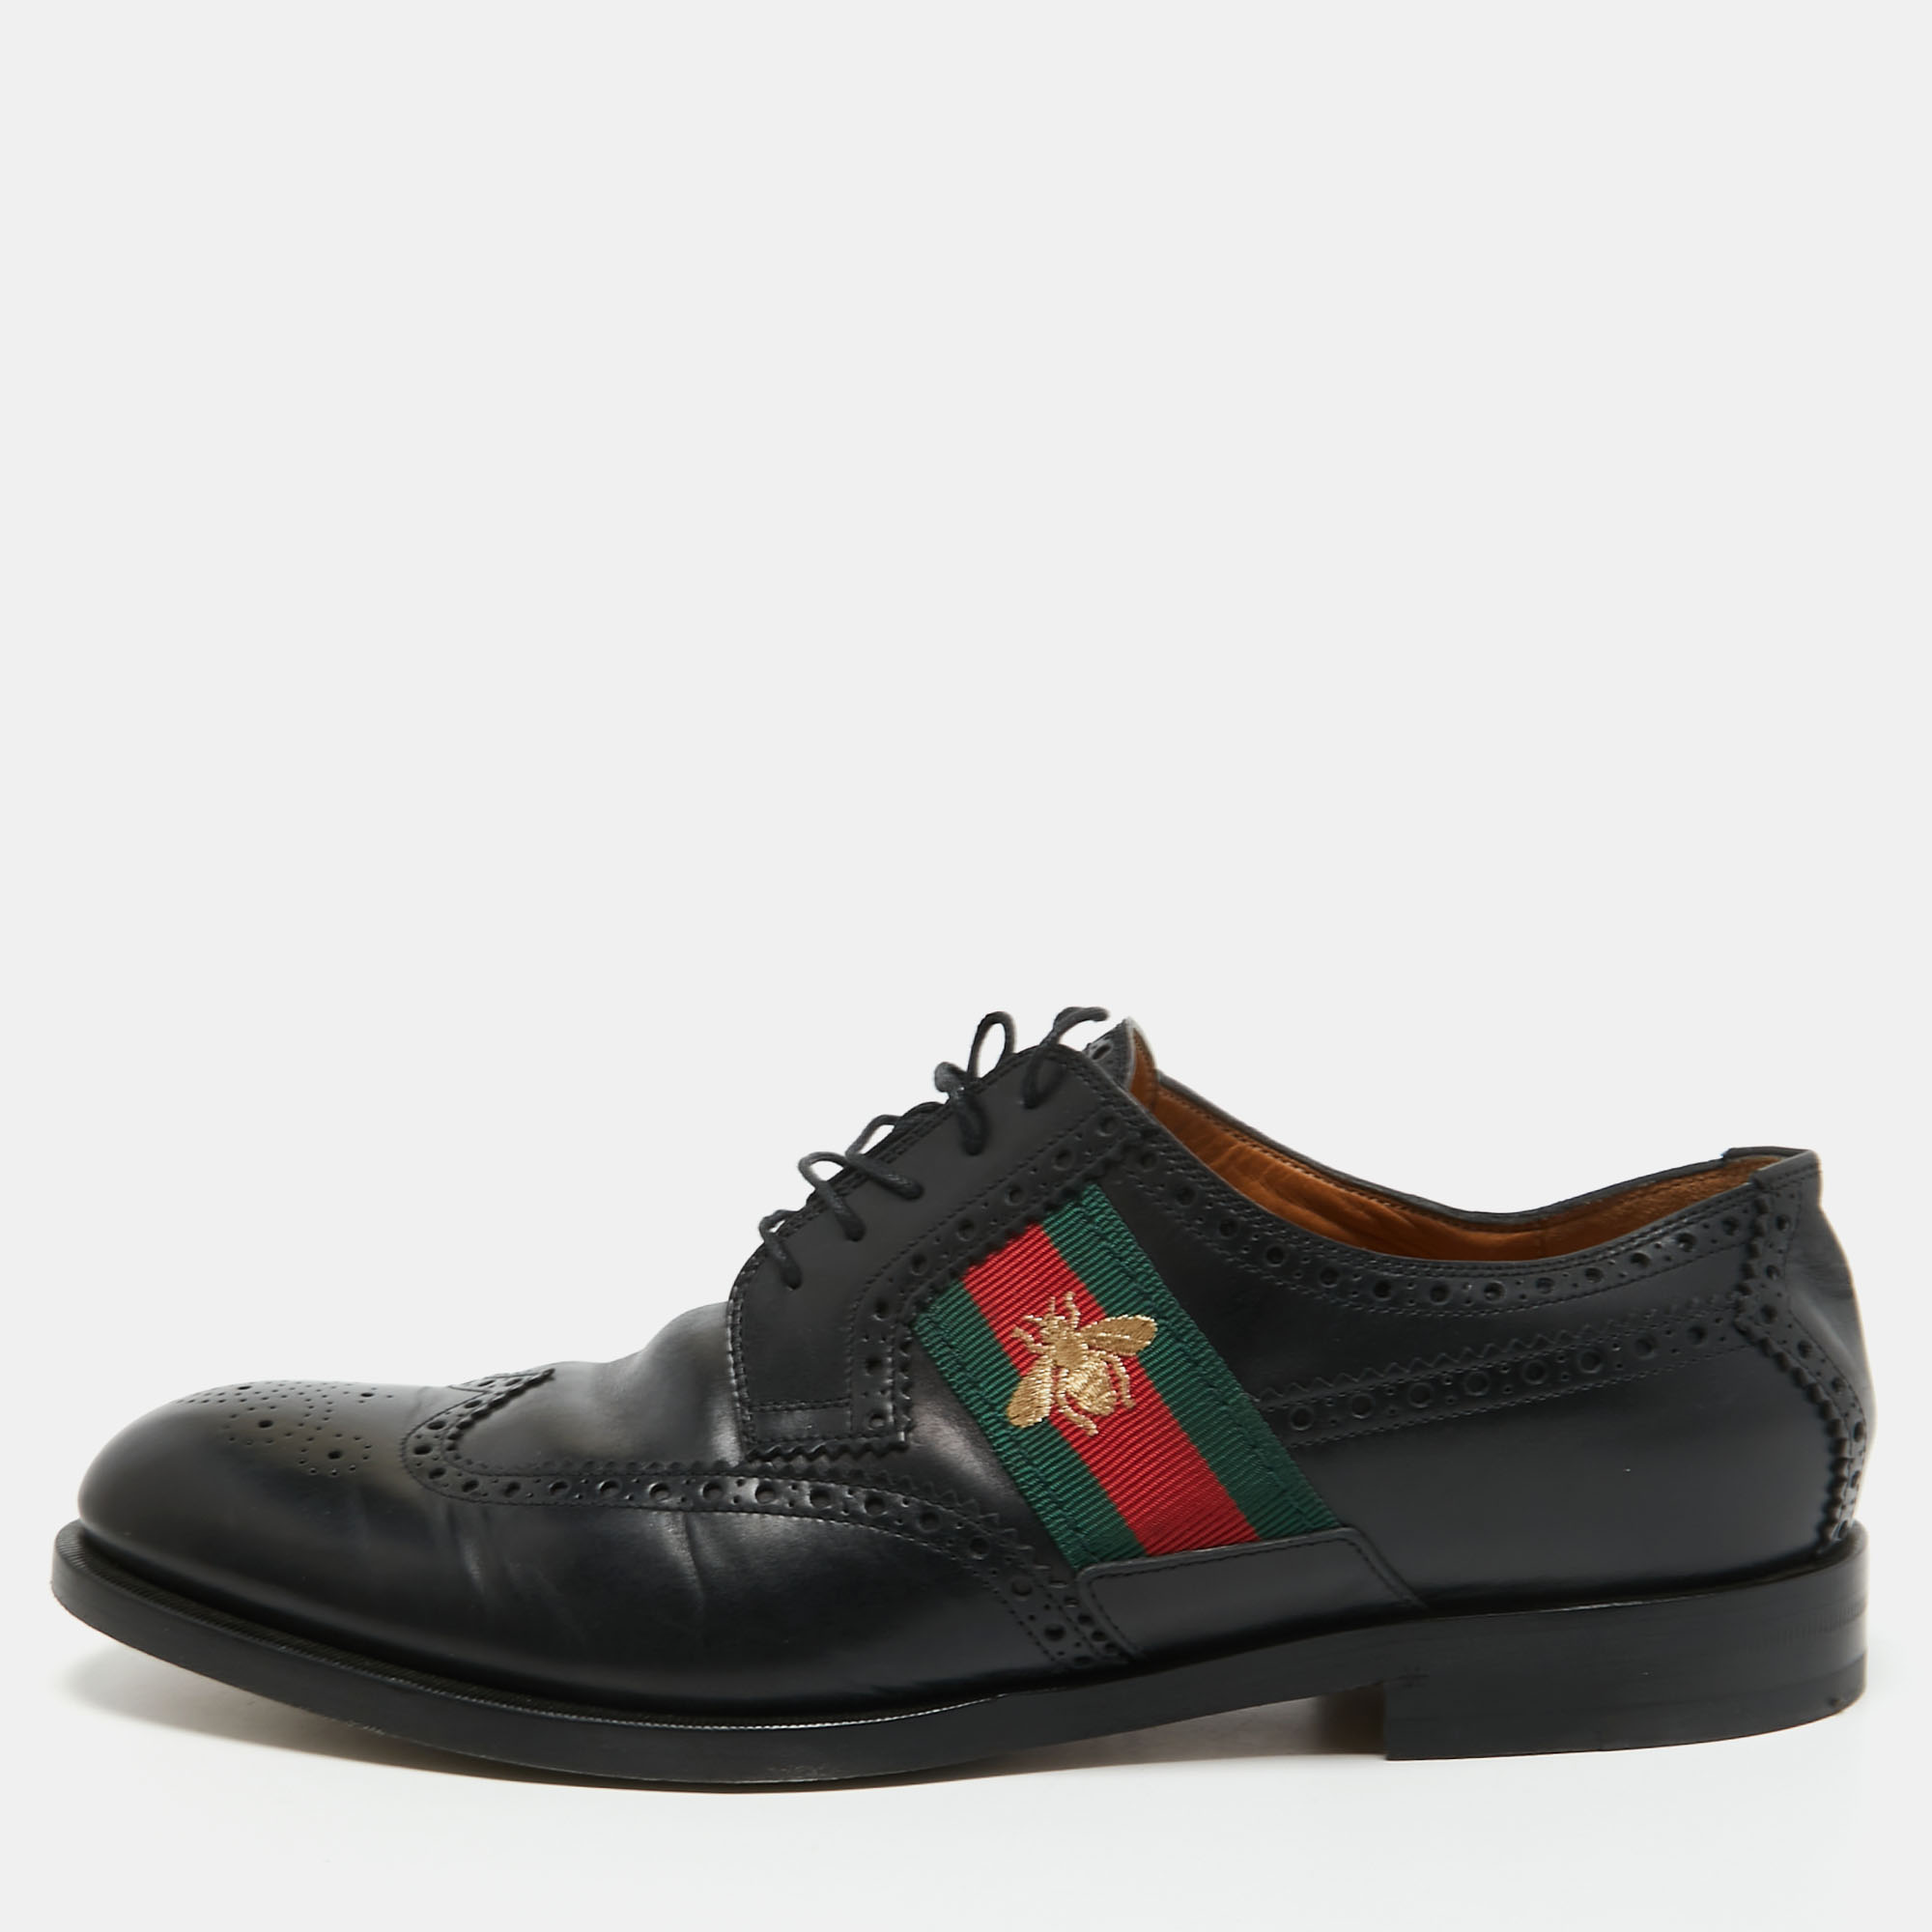 Pre-owned Gucci Black Brogue Leather Bee Web Detail Lace Up Oxfords Size 46.5